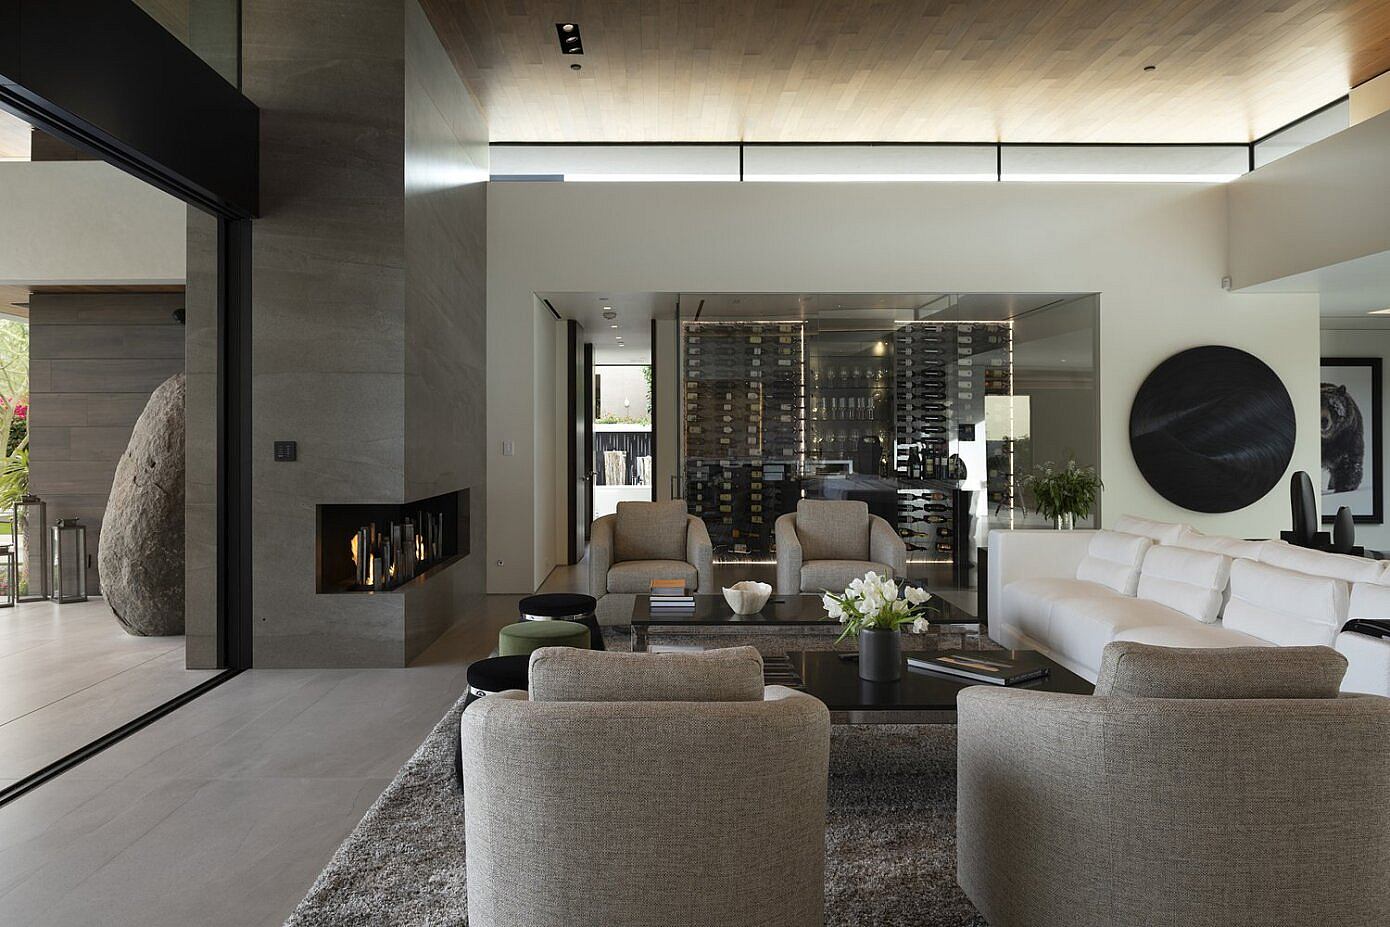 BigHorn by Whipple Russell Architects